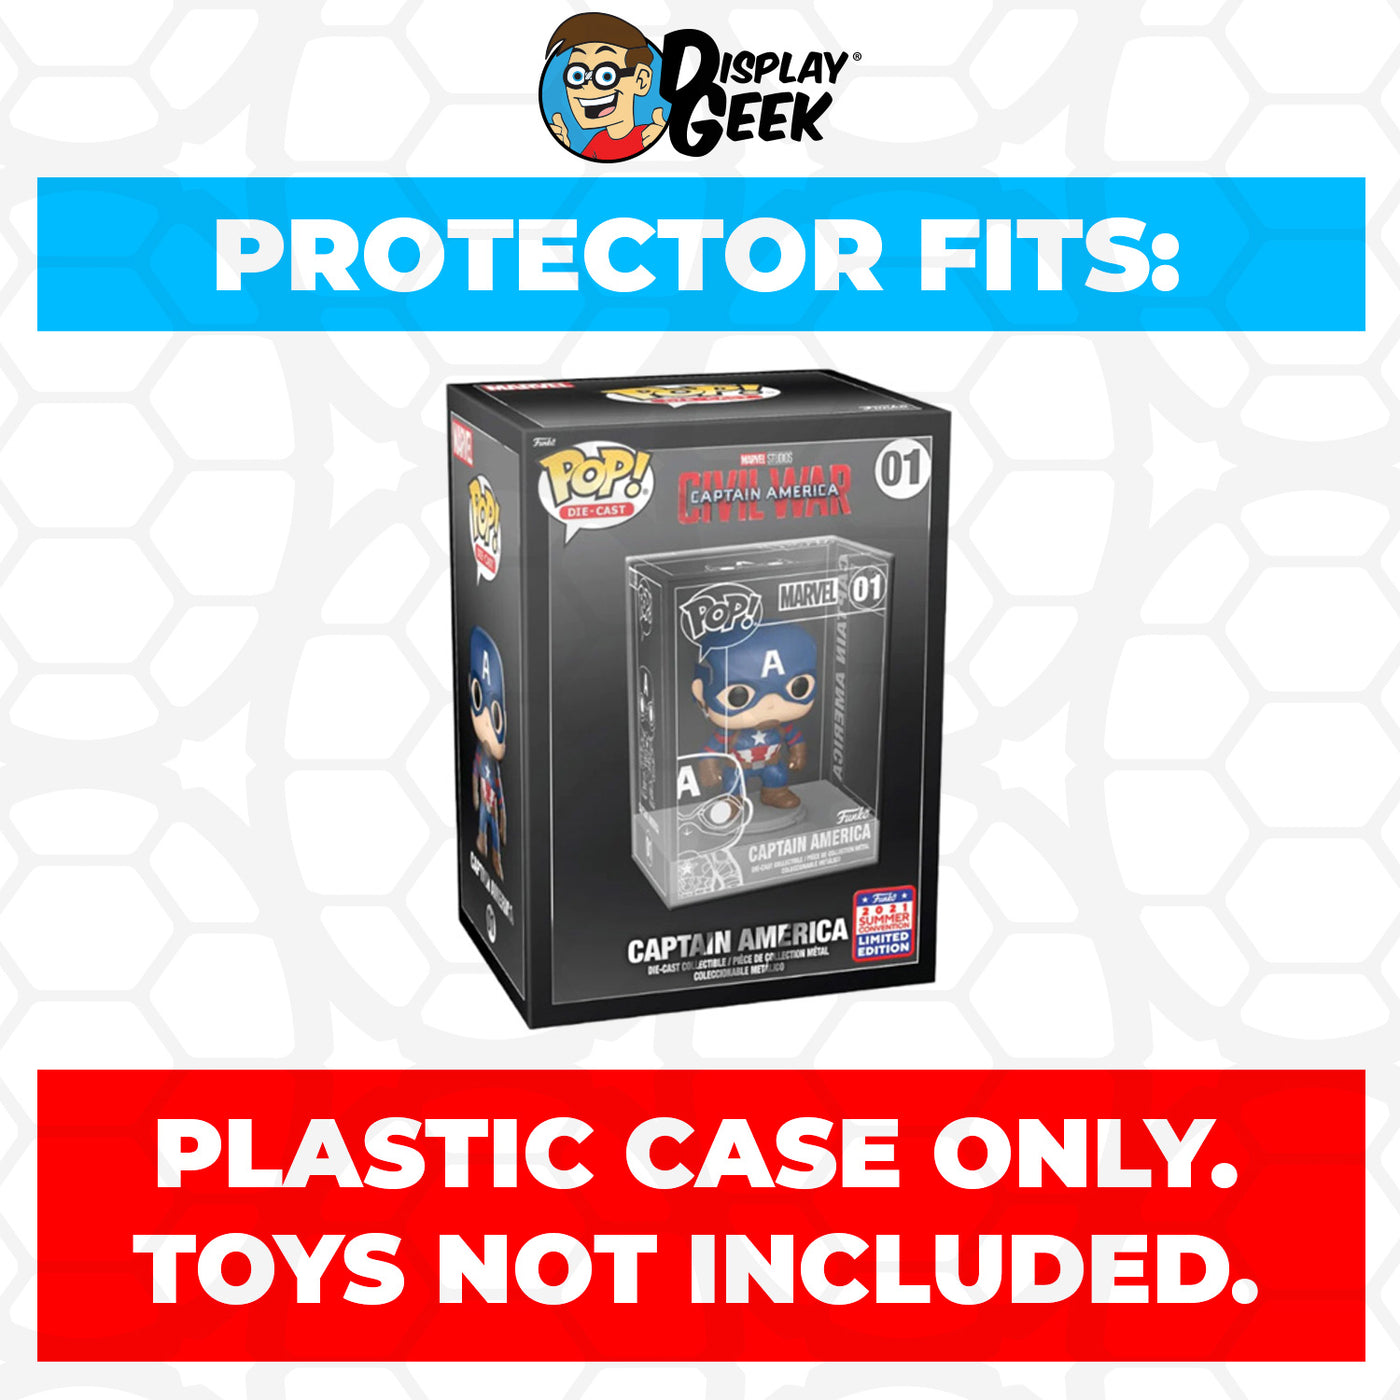 Pop Protector for Captain America FunKon #01 Funko Pop Die-Cast Outer Box on The Protector Guide App by Display Geek